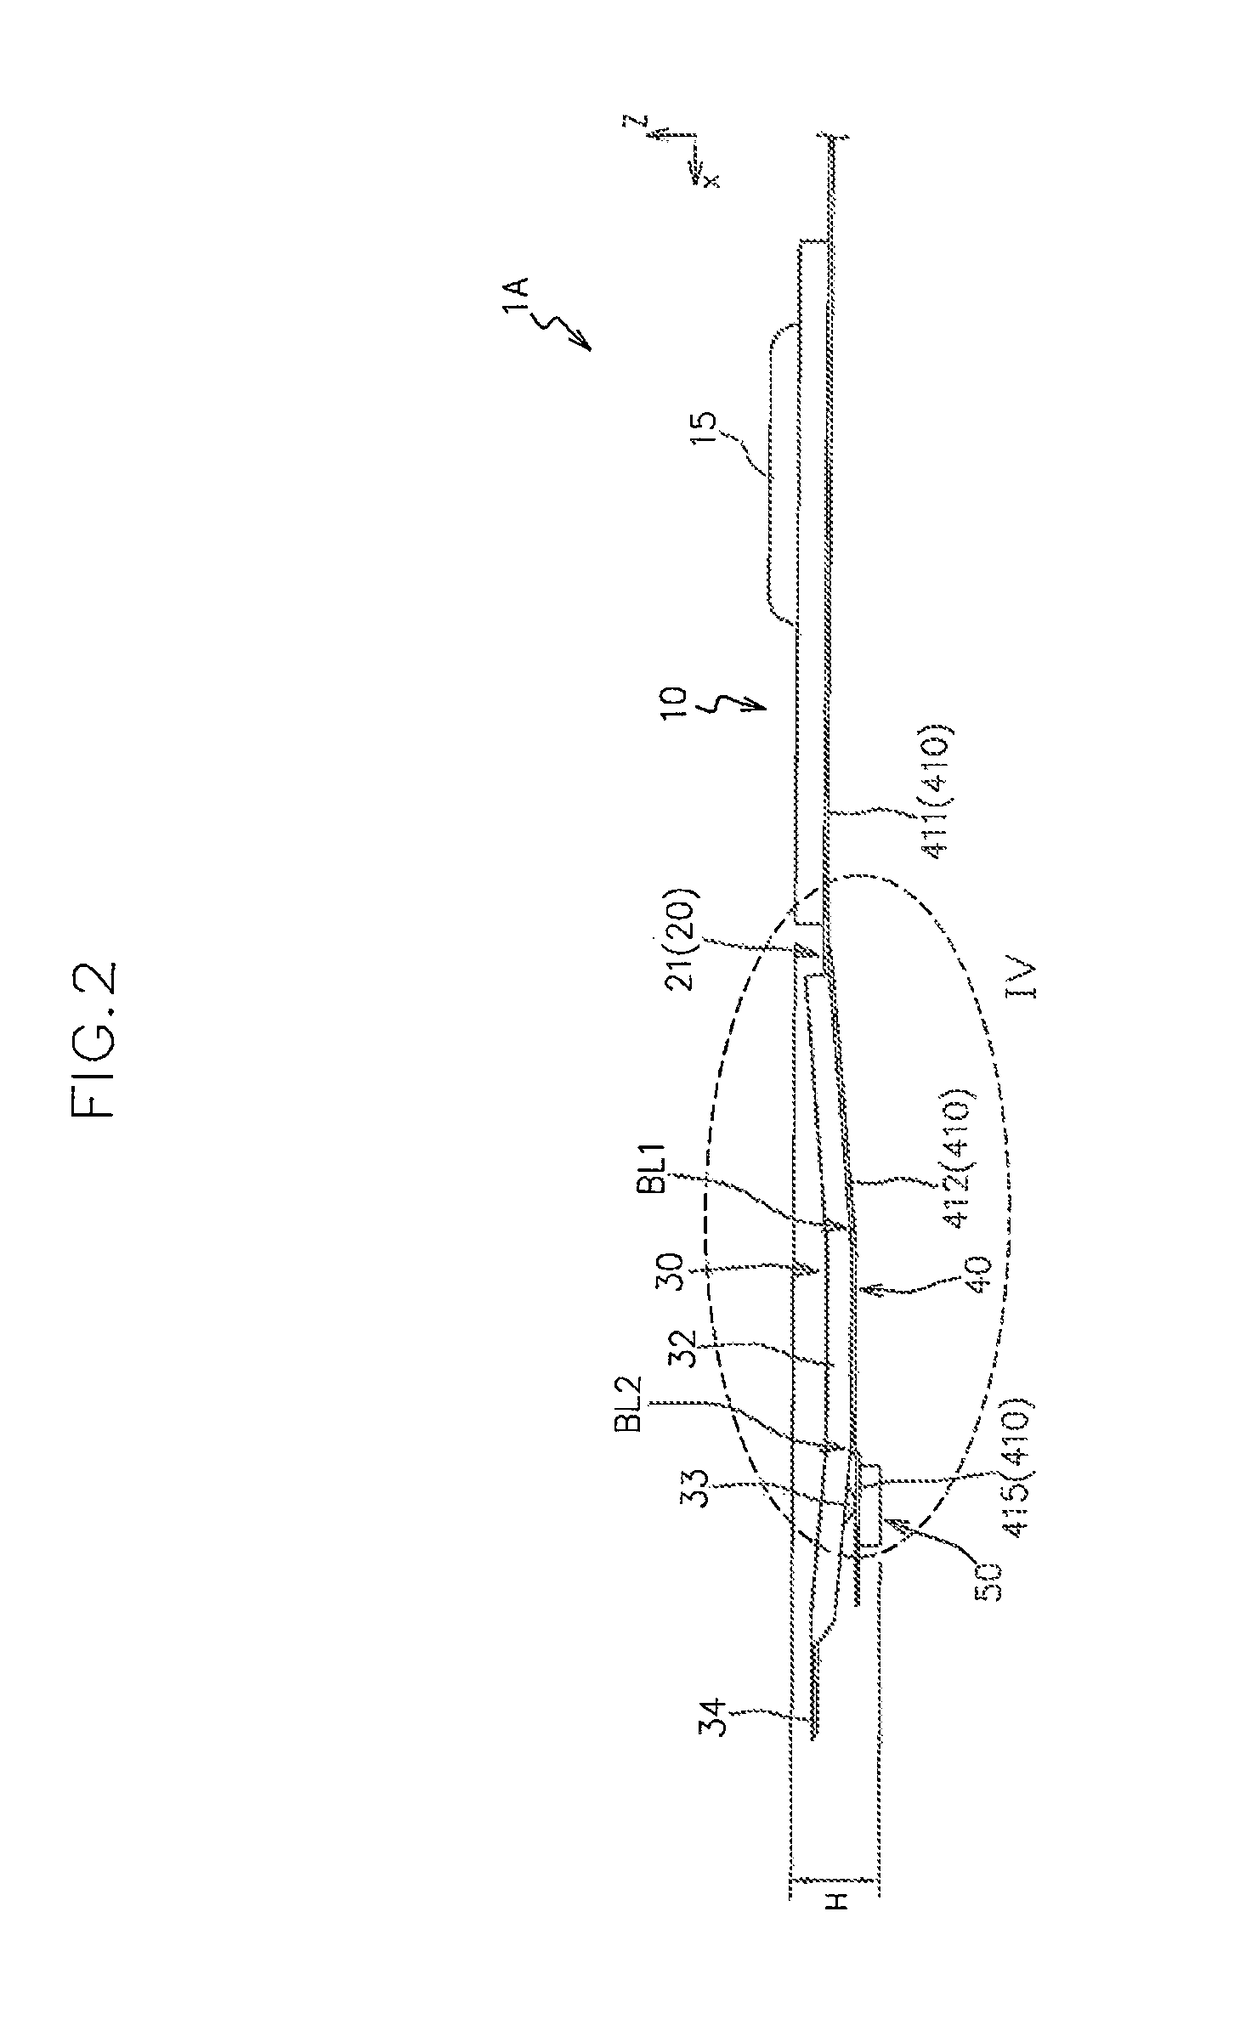 Magnetic head suspension having a load beam part with bending lines